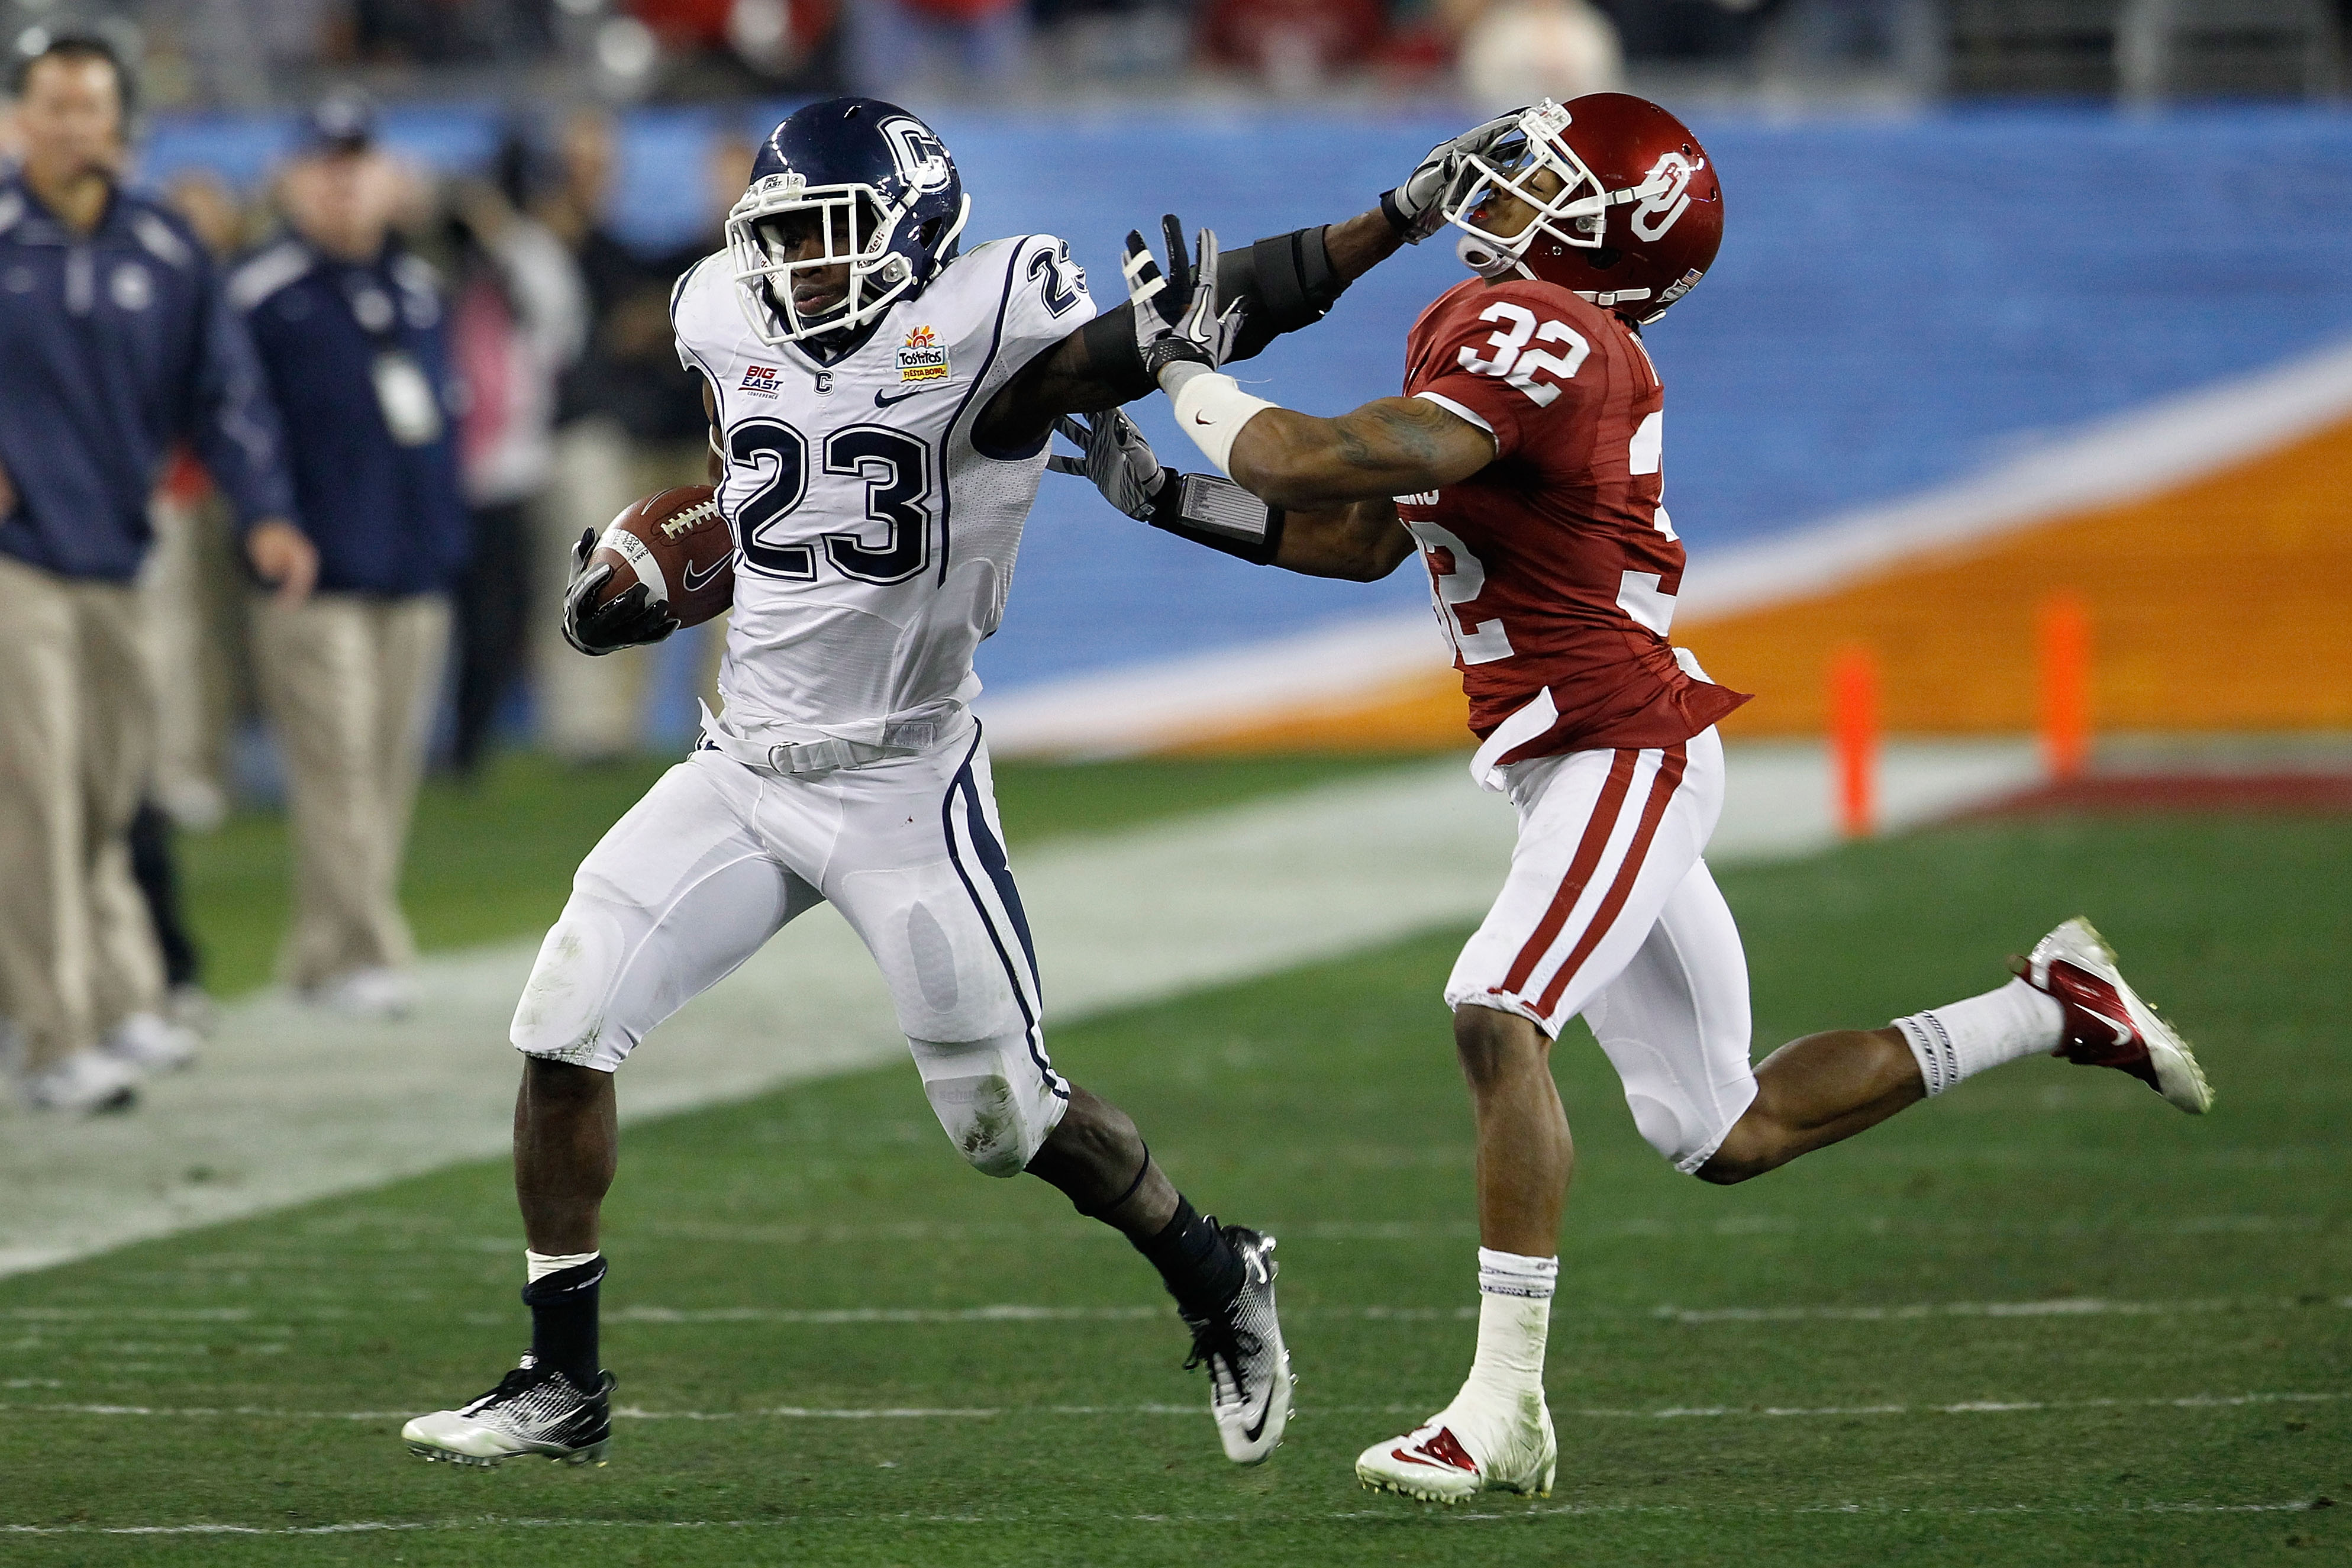 GLENDALE, AZ - JANUARY 01:  Jordan Todman #23 of the Connecticut Huskies stiff arms Jamell Fleming #32 of the Oklahoma Sooners in the second quarter during the Tostitos Fiesta Bowl at the Universtity of Phoenix Stadium on January 1, 2011 in Glendale, Ariz